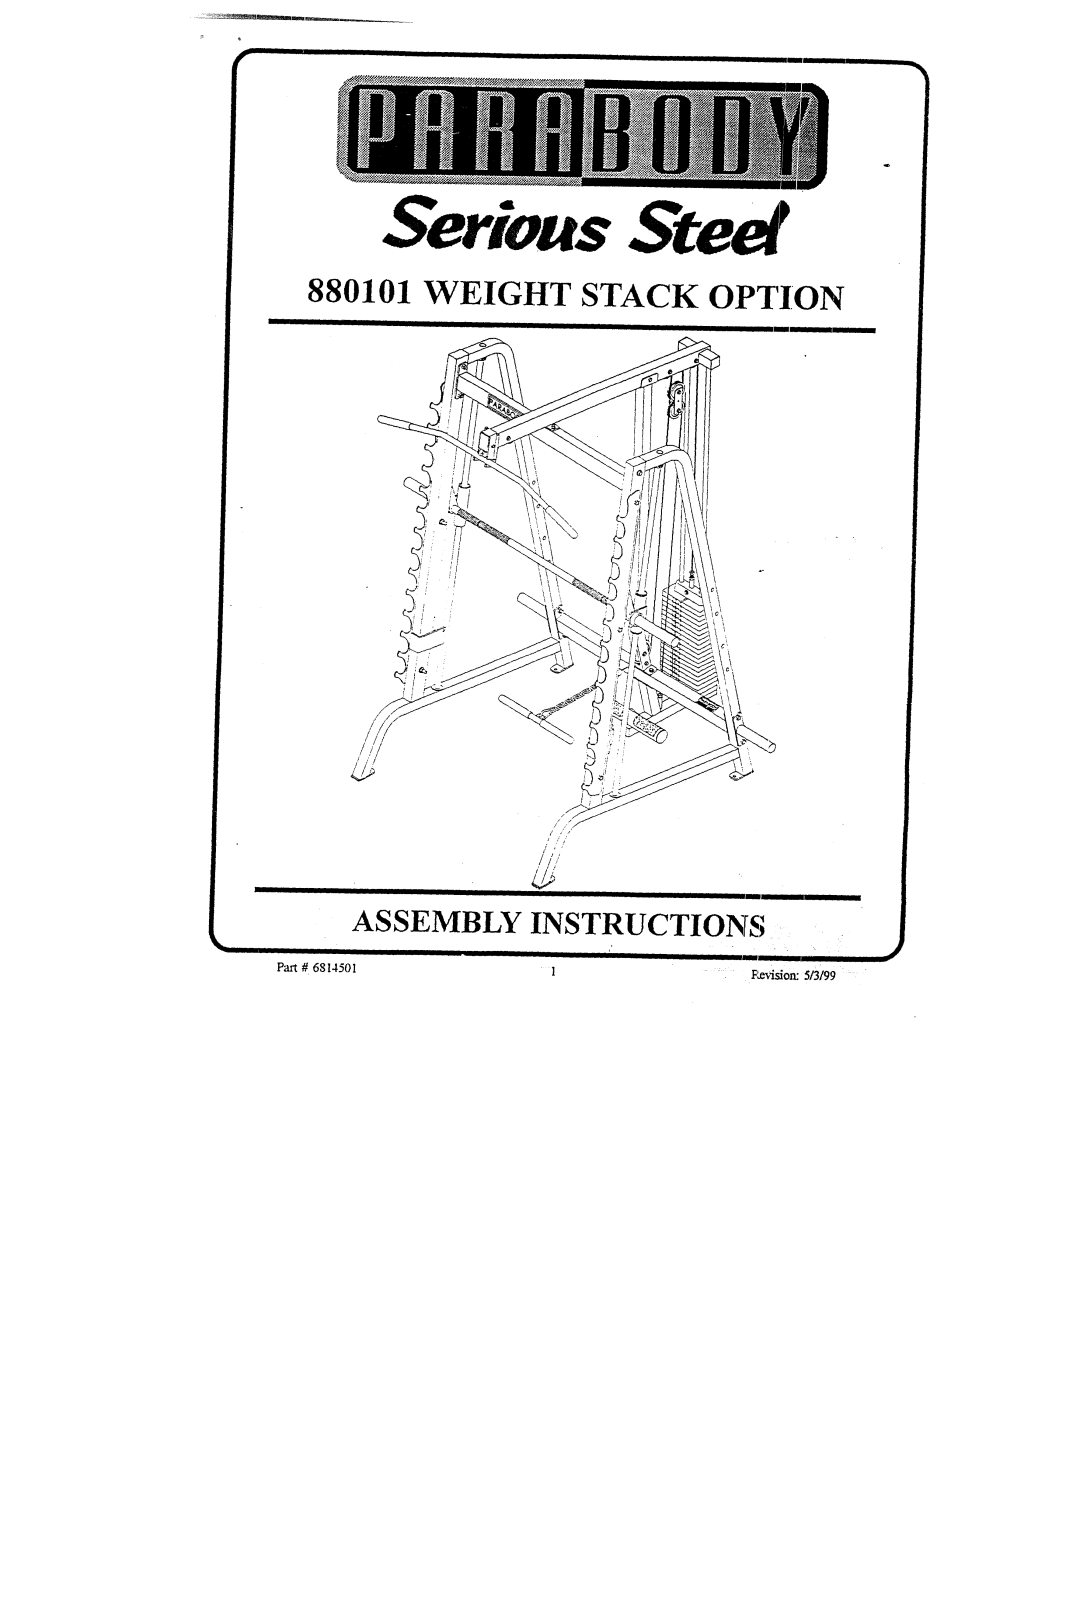 ParaBody 880101 manual Serious Steel, Weight Stack Option Assembly Instructions 